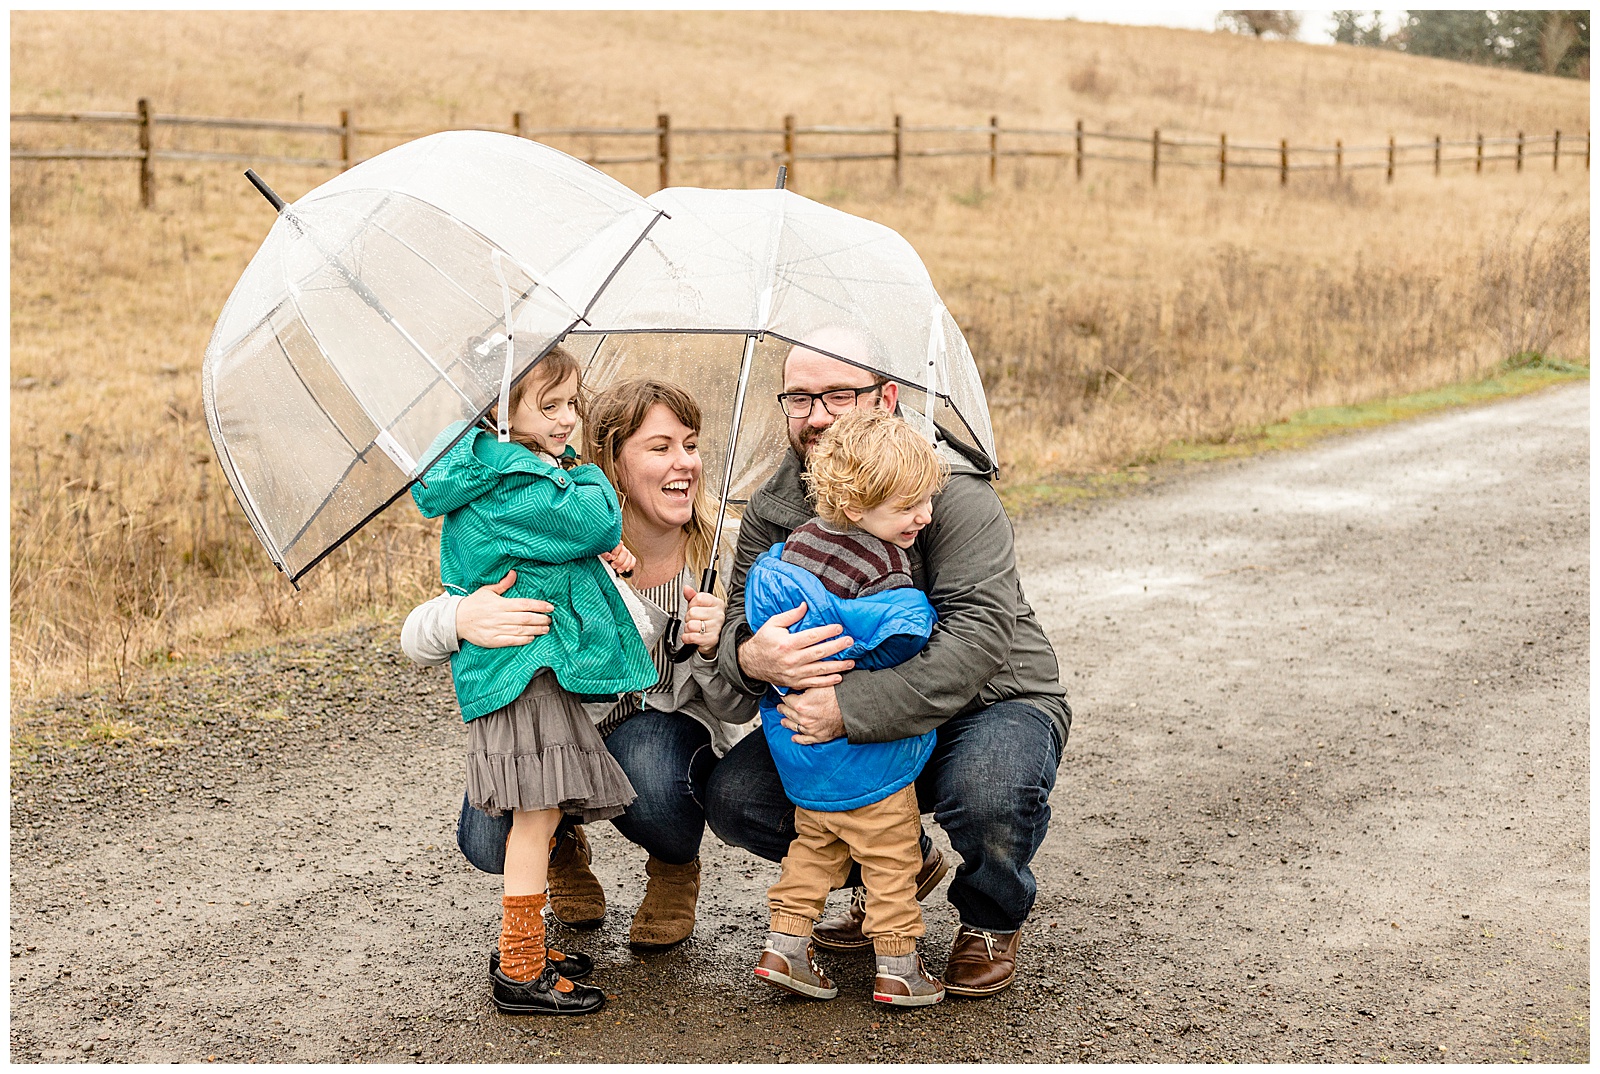 Family of four hugging under some clear umbrellas